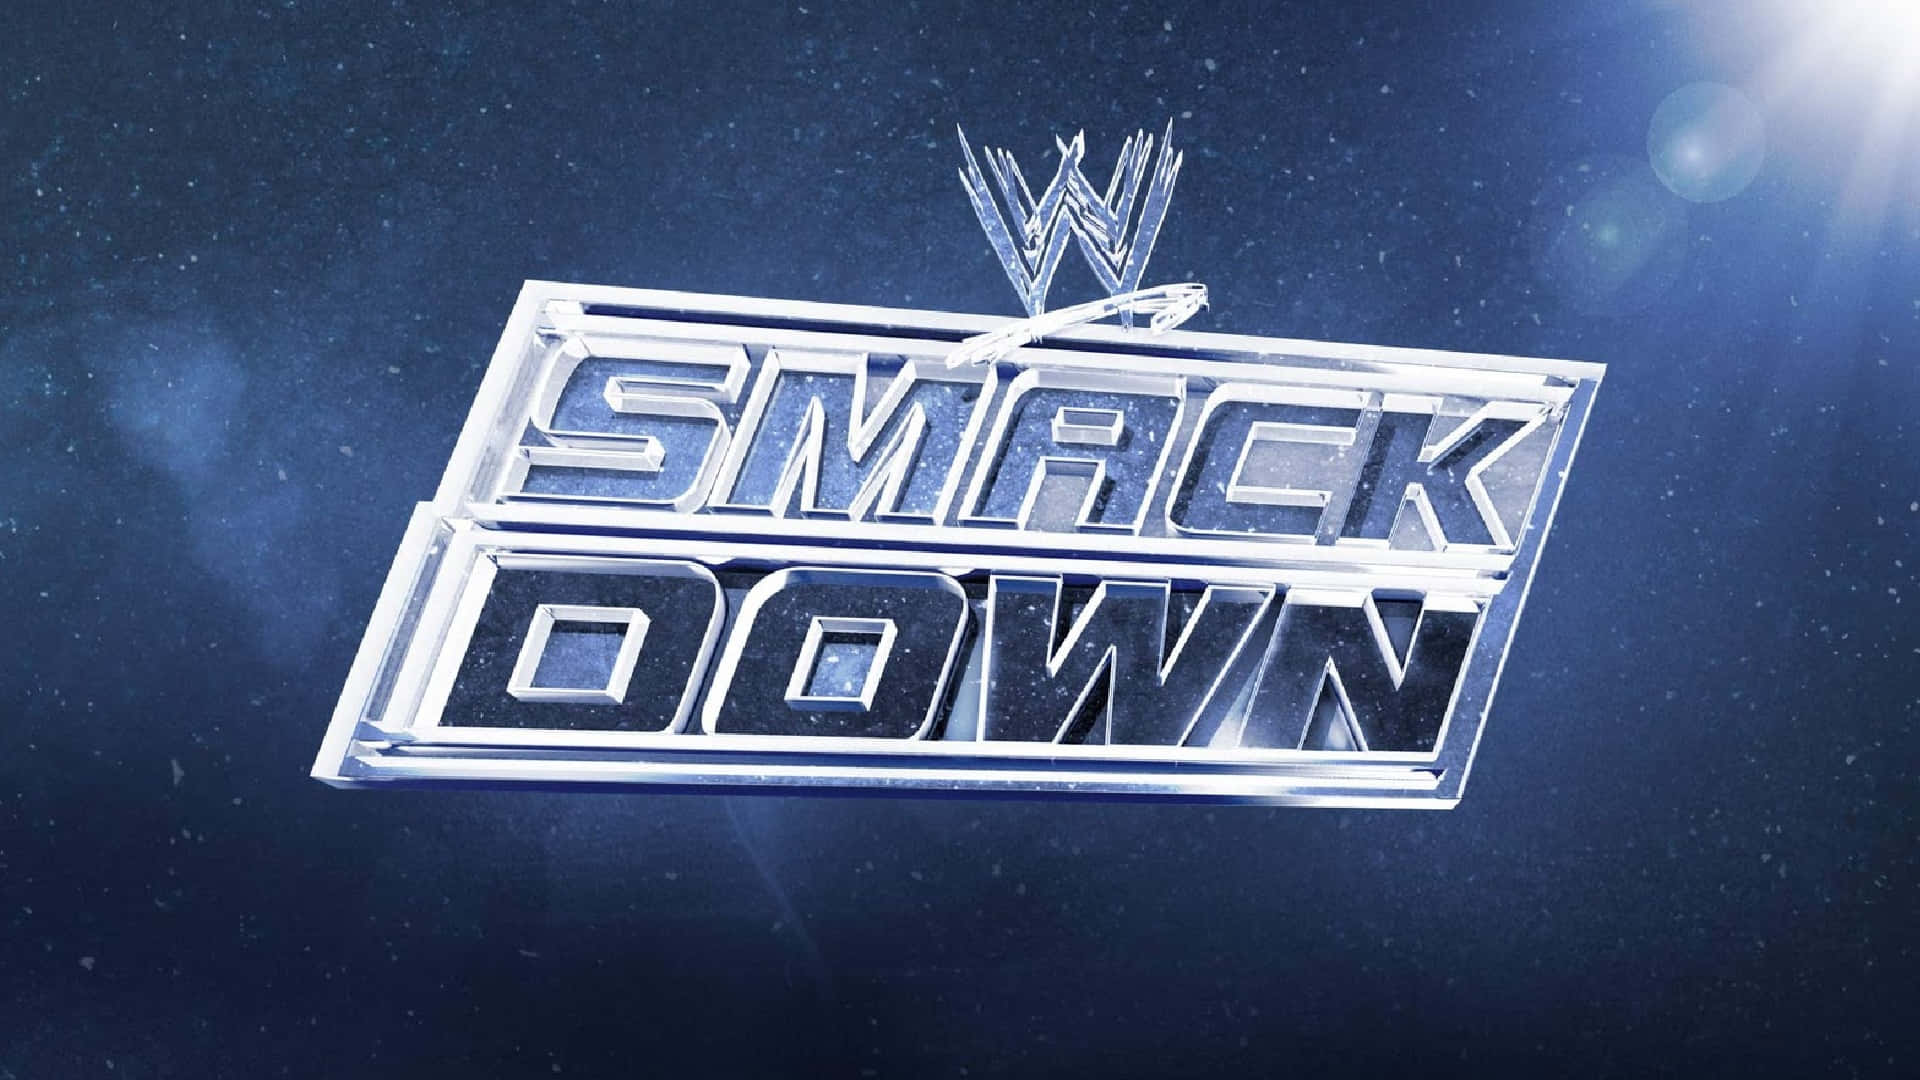 Edge steps up to Sheamus during Smackdown Wallpaper